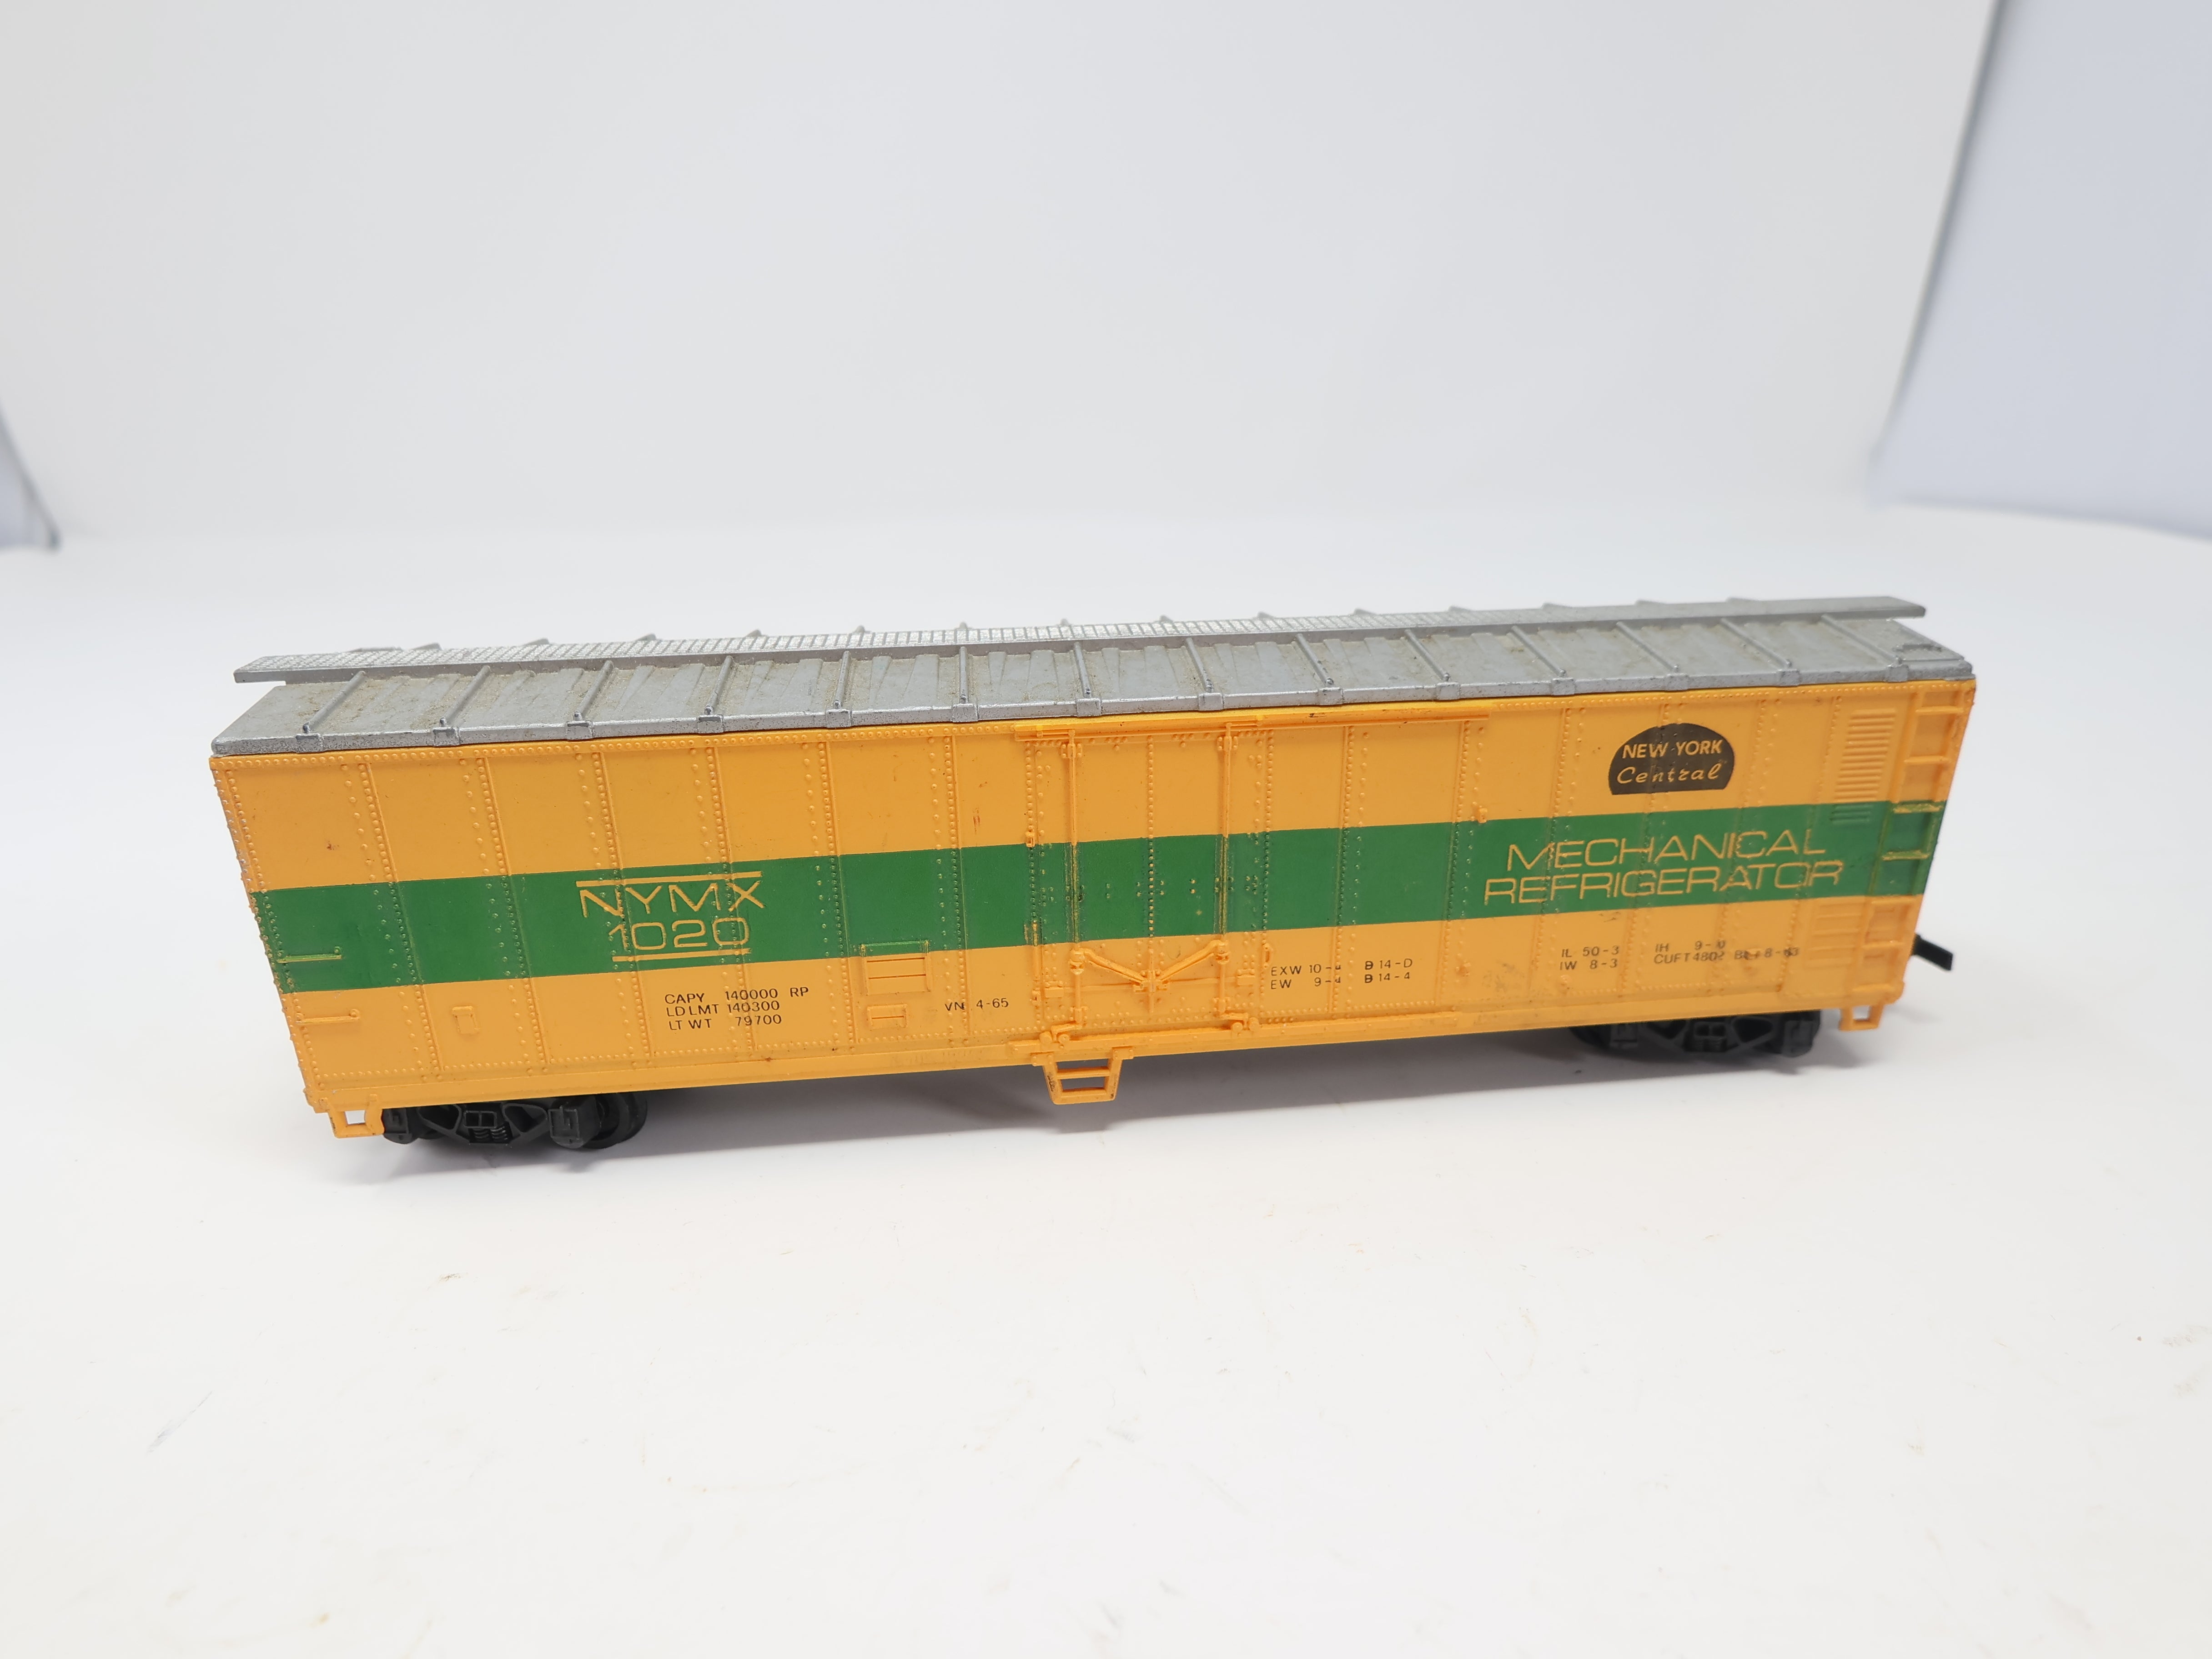 USED LIMA HO Scale, 50' Steel Box Car, New York Central NYMX #1020